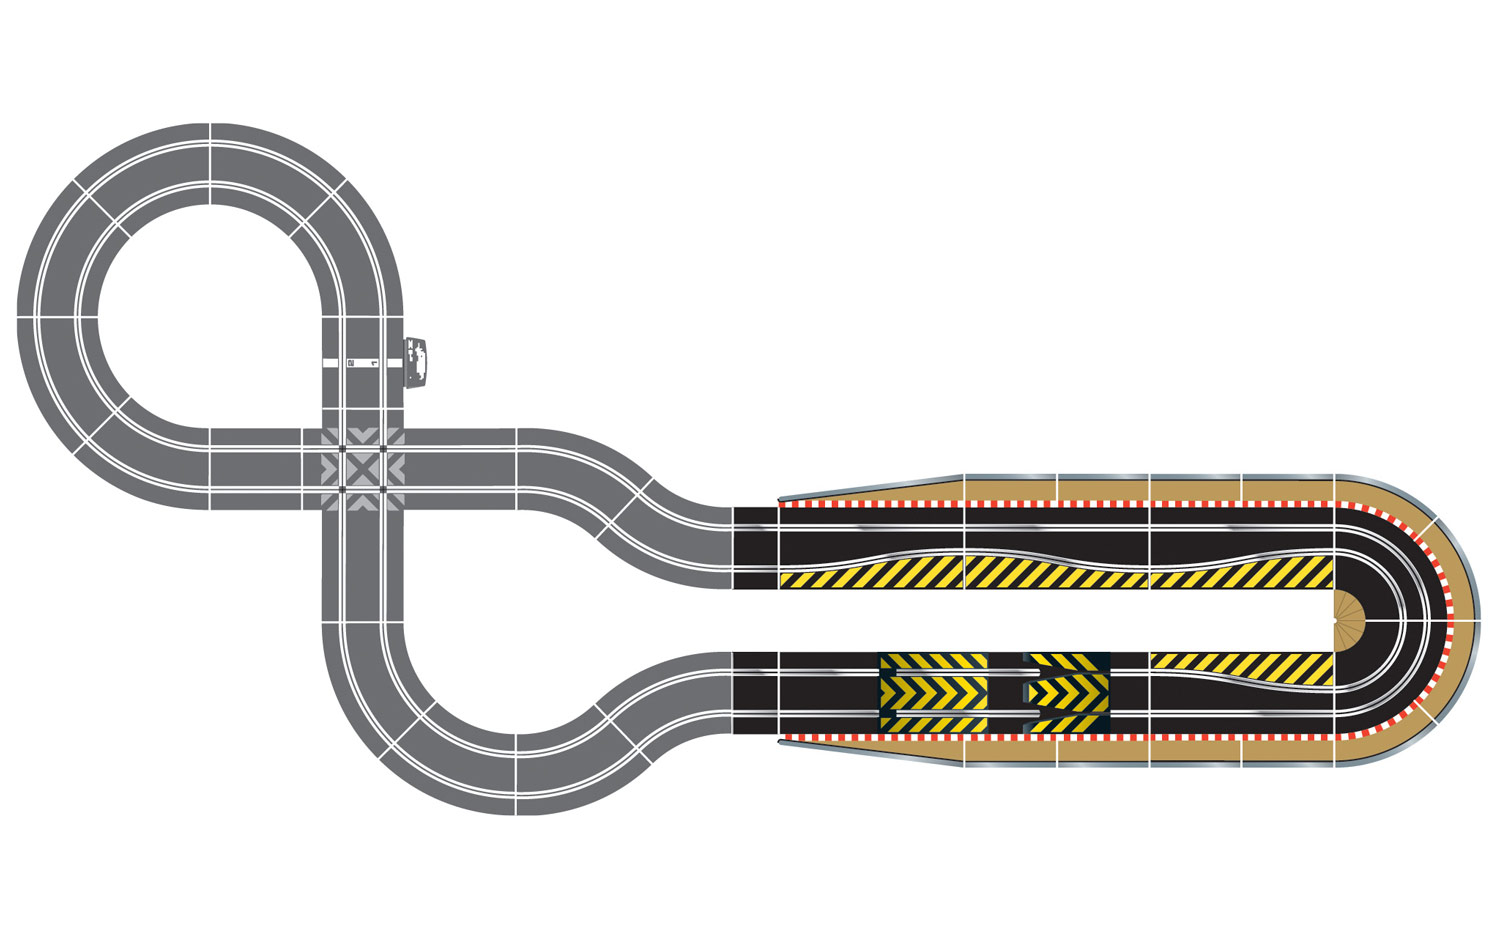 Extended tracks. Scalextric track.